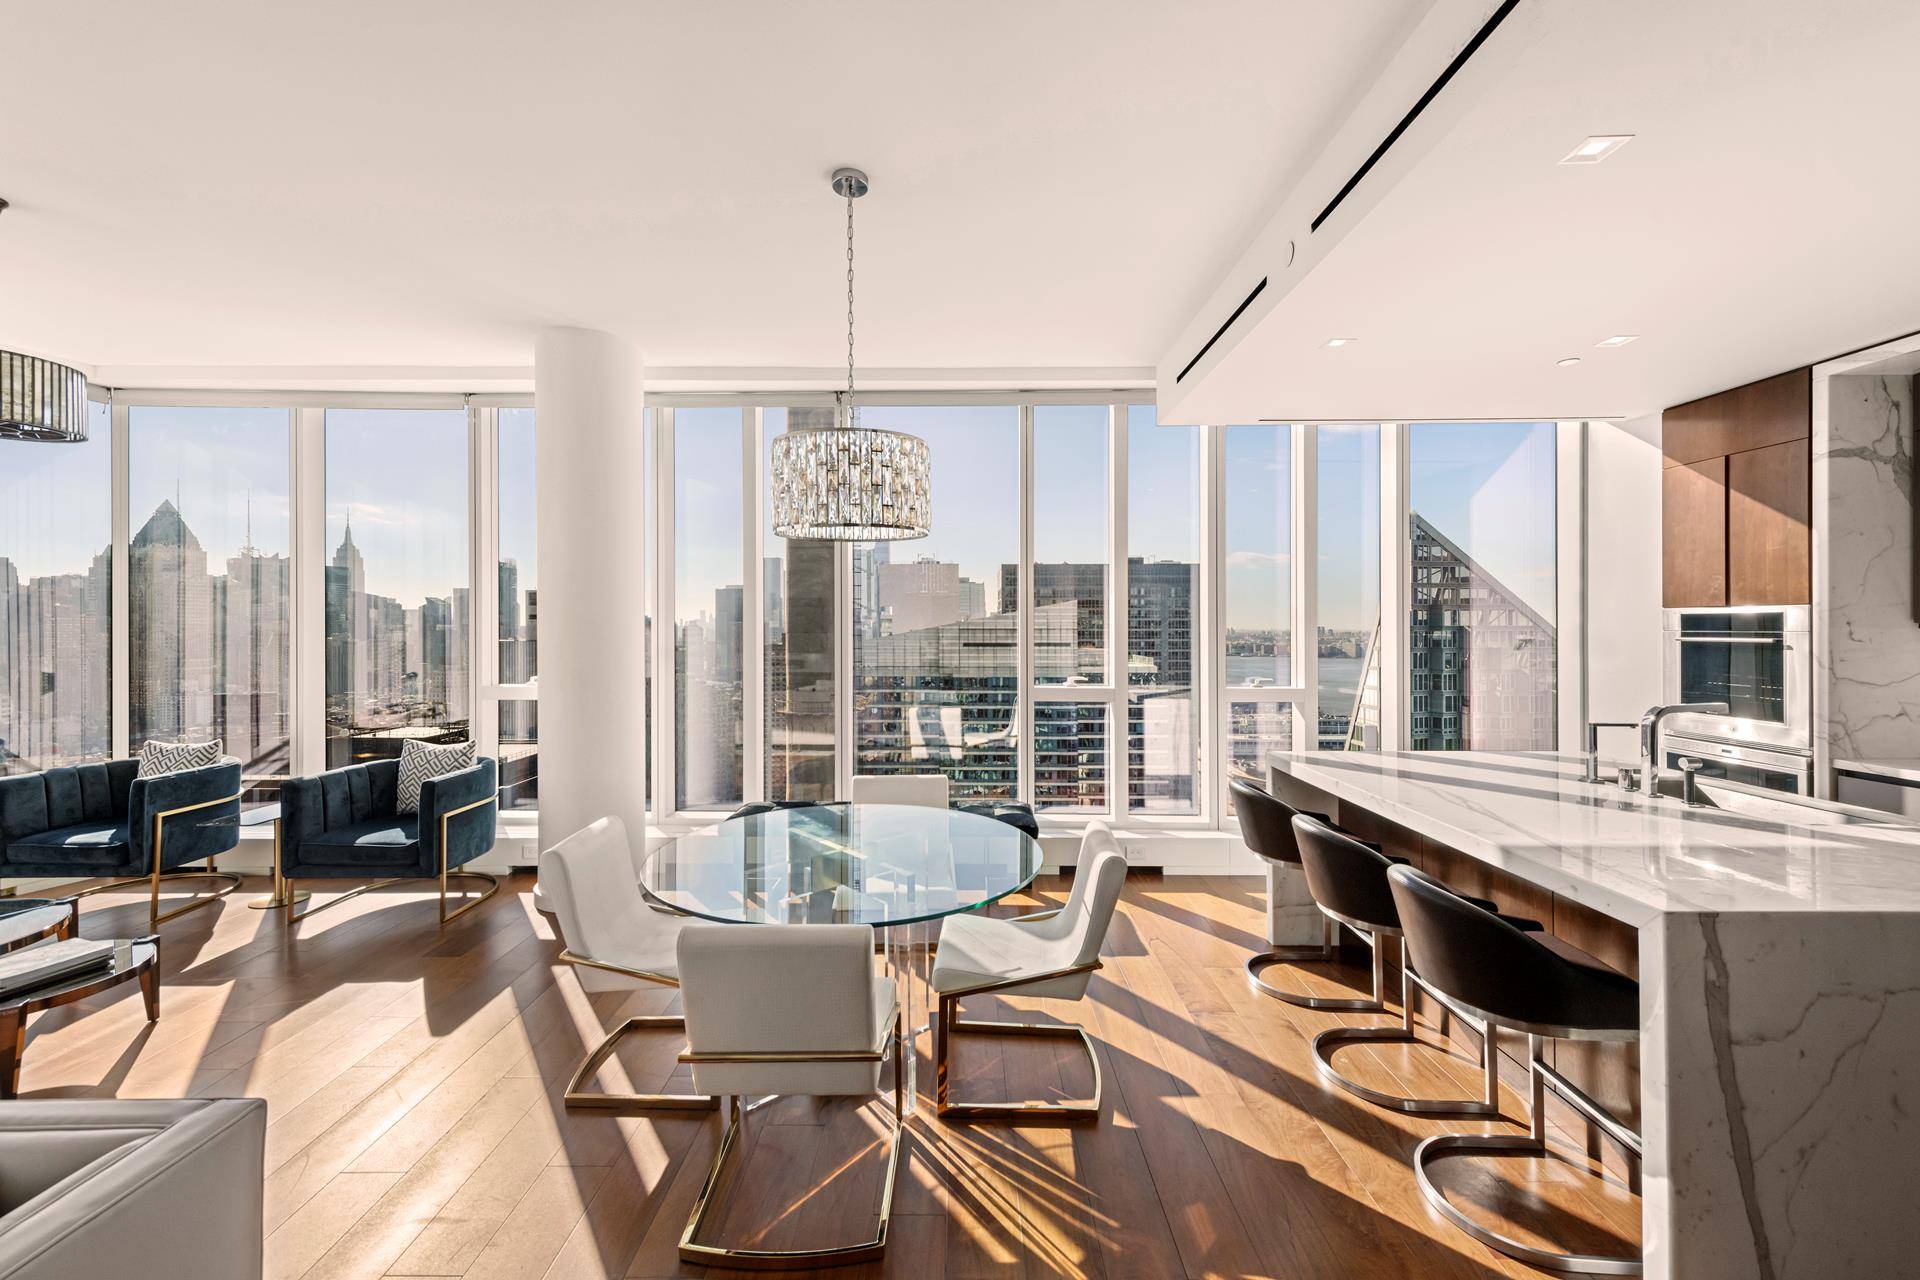 This spectacular four bedroom, four and a half bath corner residence offers some of the most compelling river and city views on the Upper West Side from floor to ceiling ...